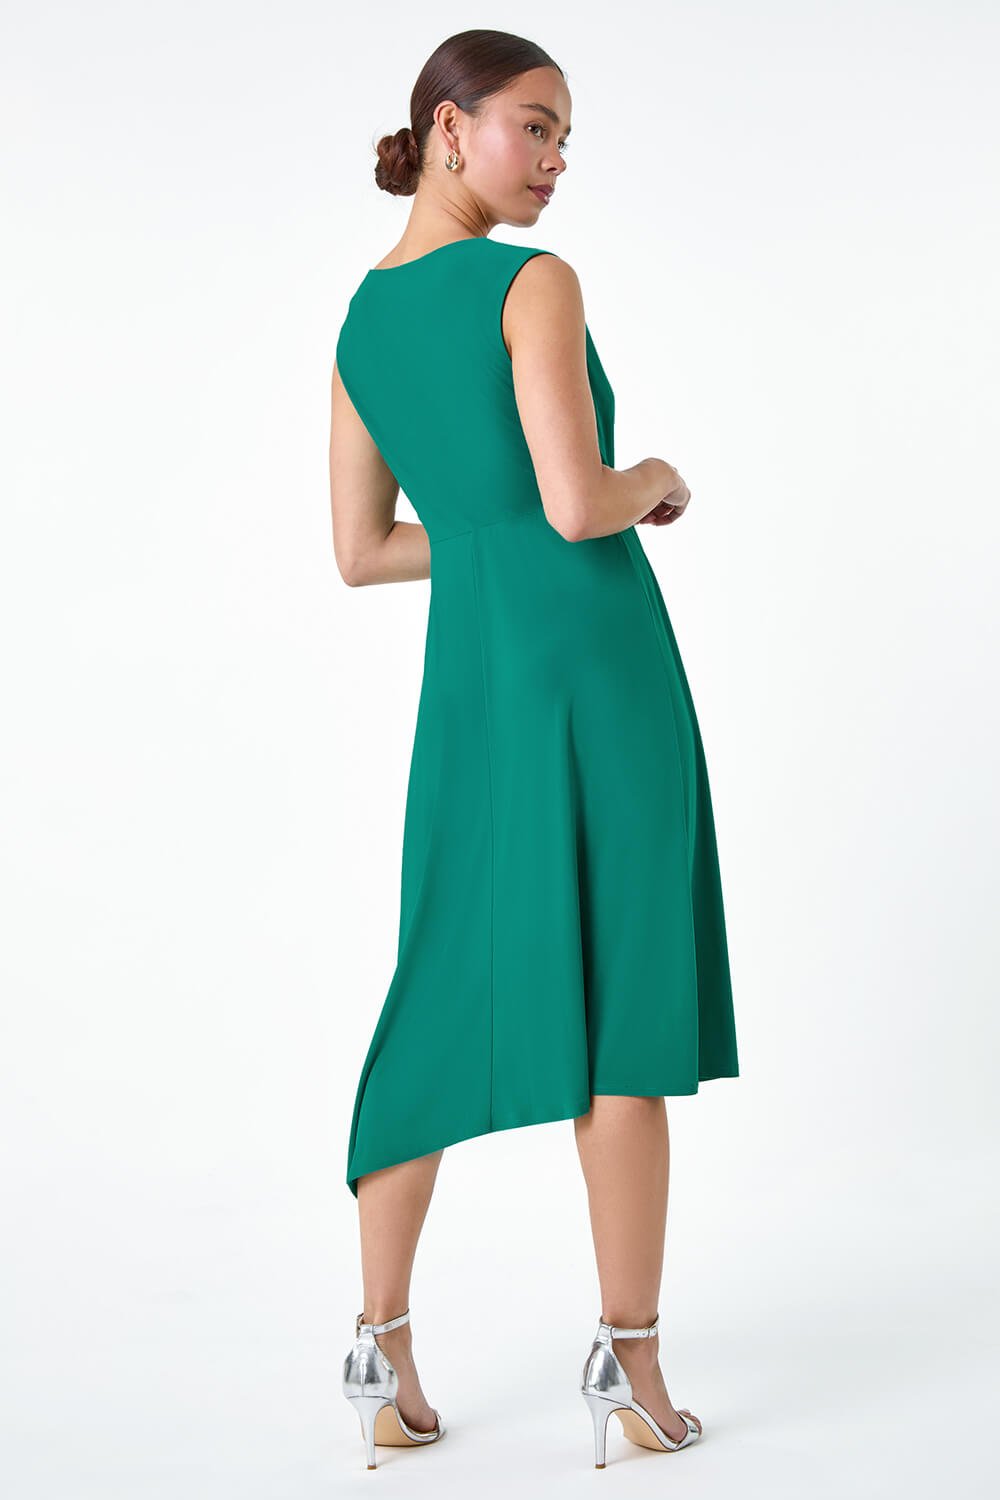 Teal Petite Pleat Detail Stretch Wrap Dress, Image 3 of 5